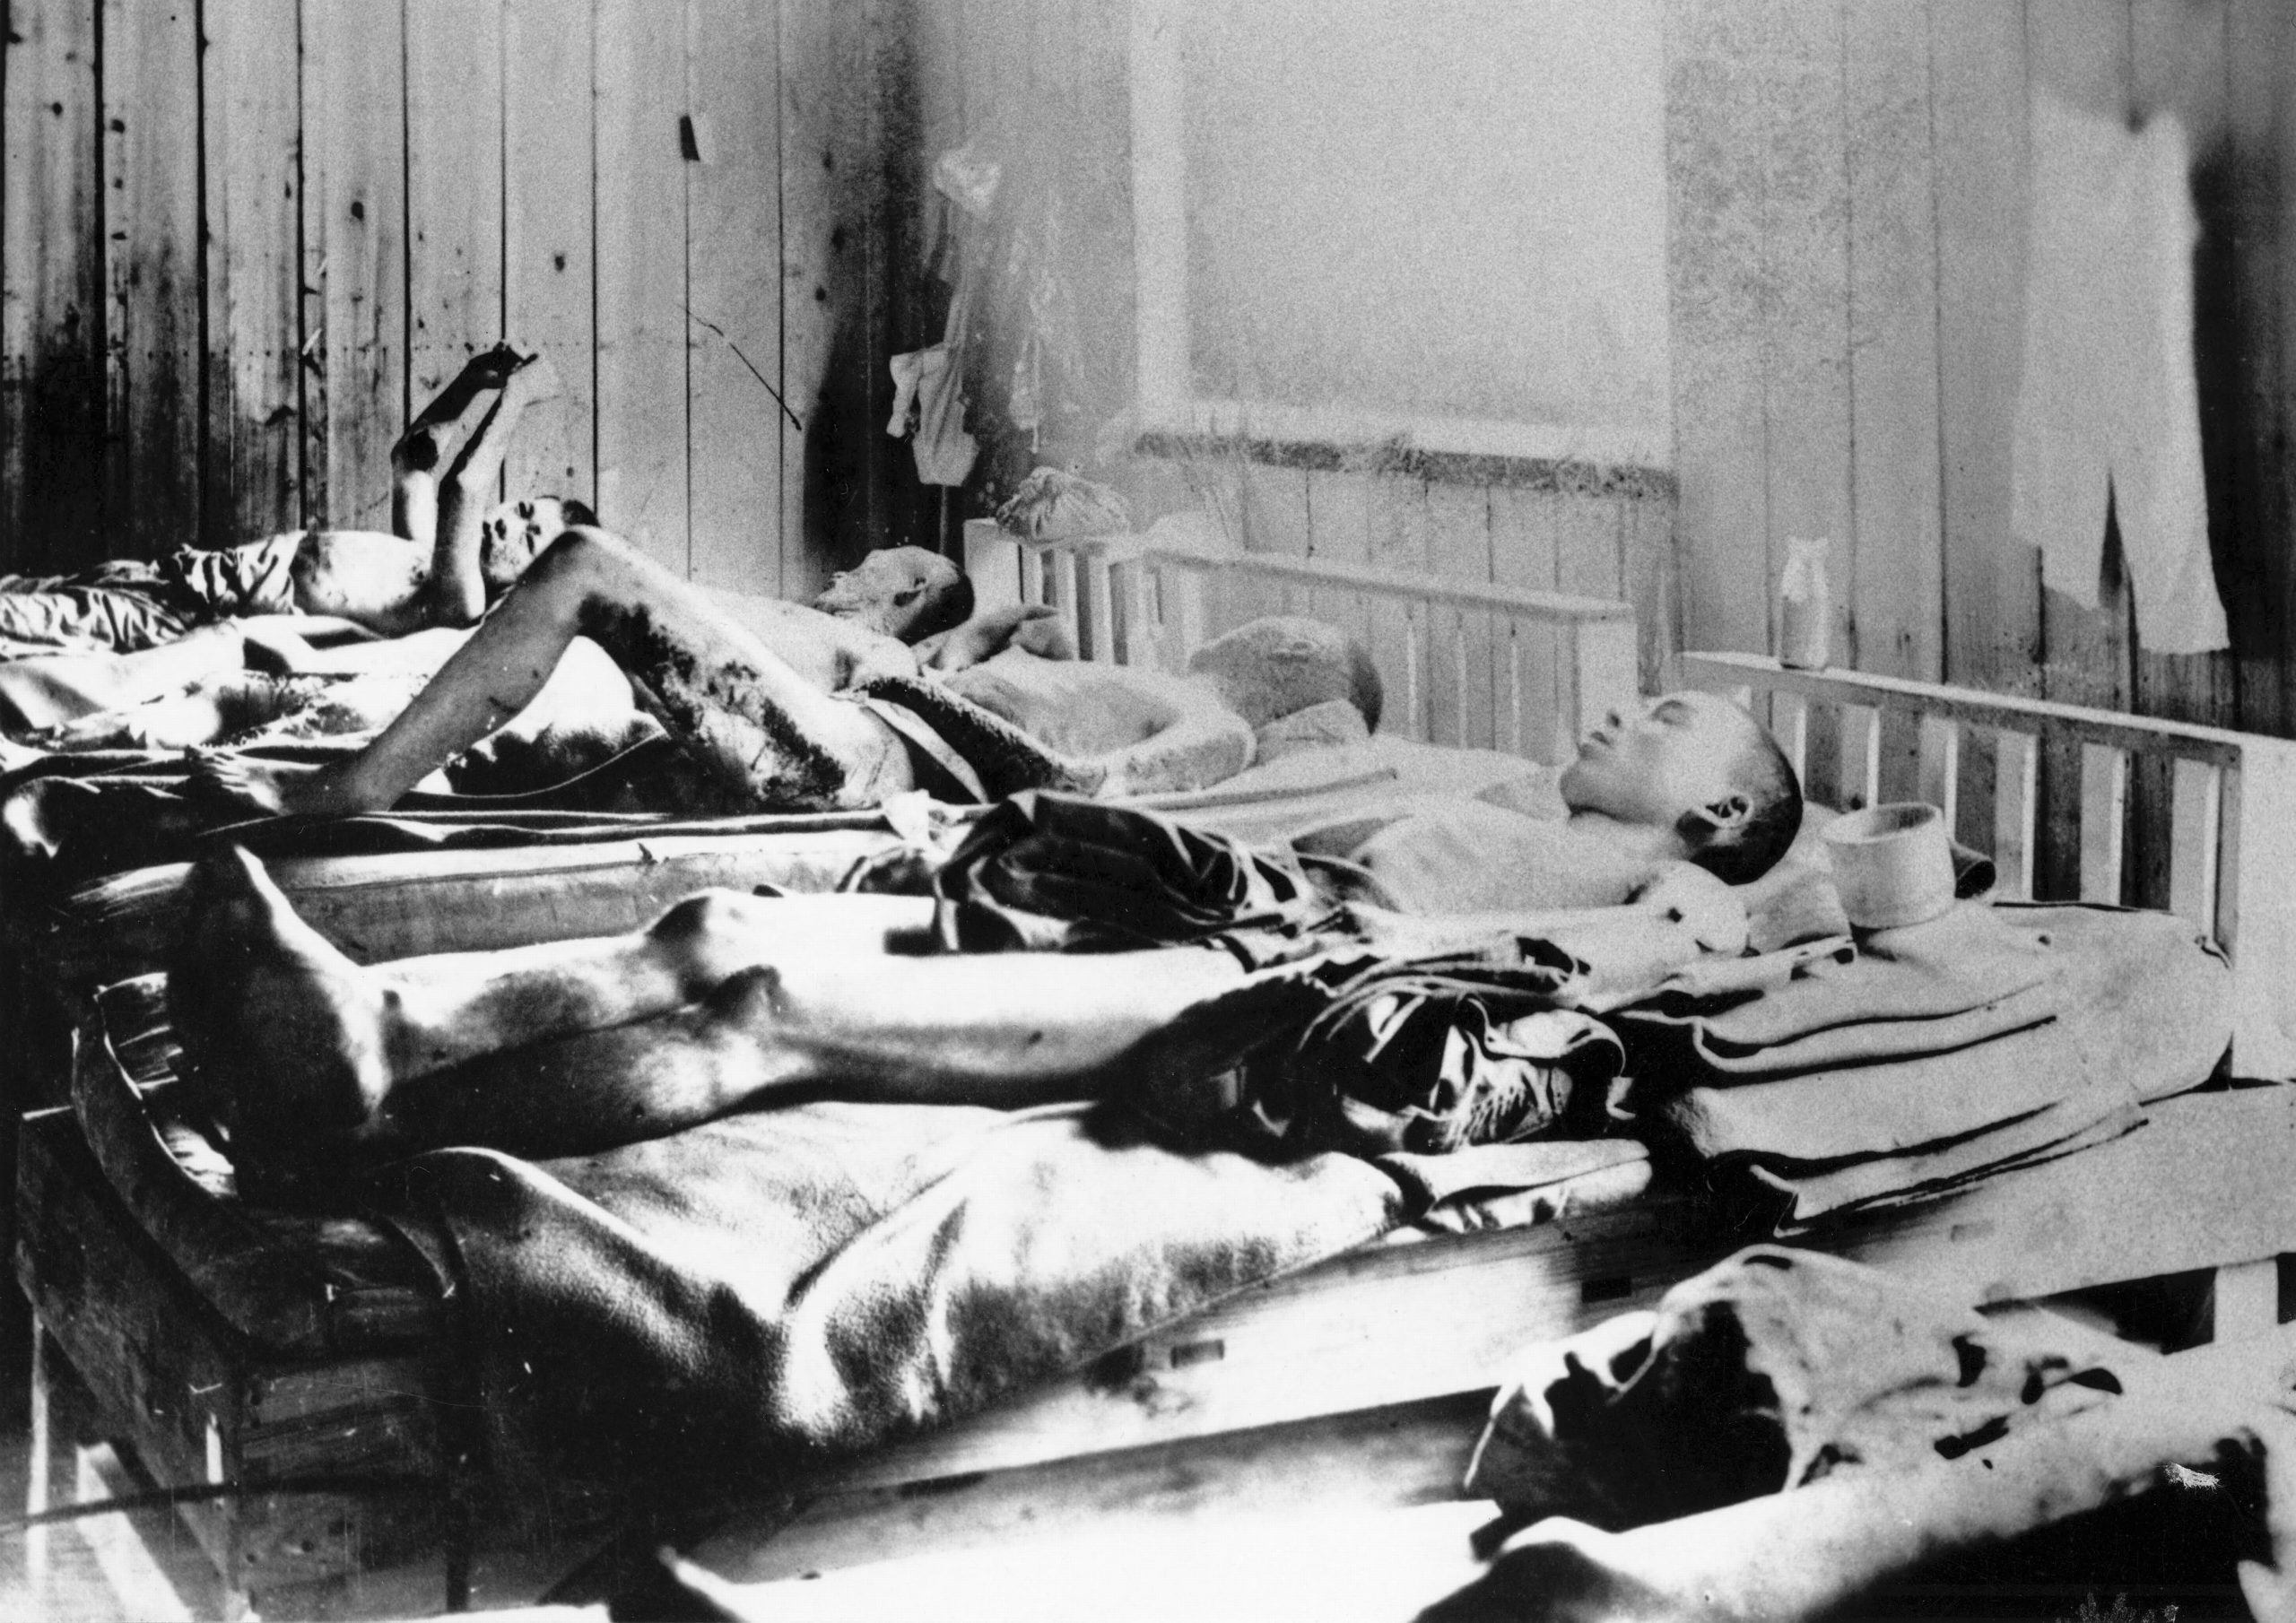 Survivors of the explosion of the Atom bomb at Hiroshima 1945 suffering the effects of radiation. ICRC photograph.